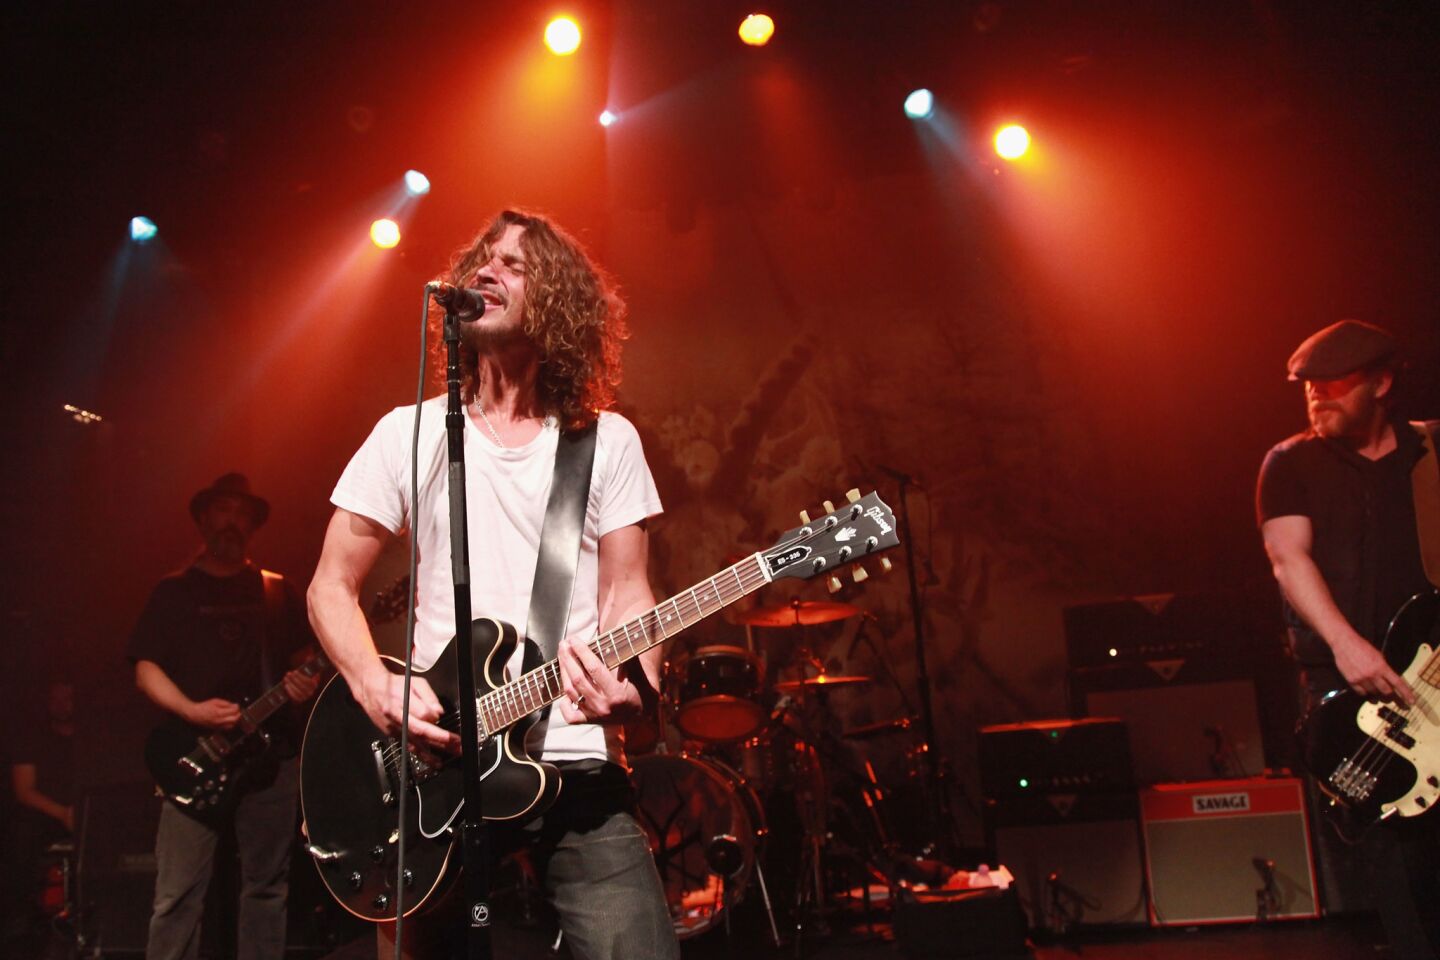 From left, Kim Thayil, Chris Cornell and Ben Shepherd of Soundgarden perform at an intimate show in celebration of their new album "King Animal" at Irving Plaza on Nov. 13, 2012, in New York City.